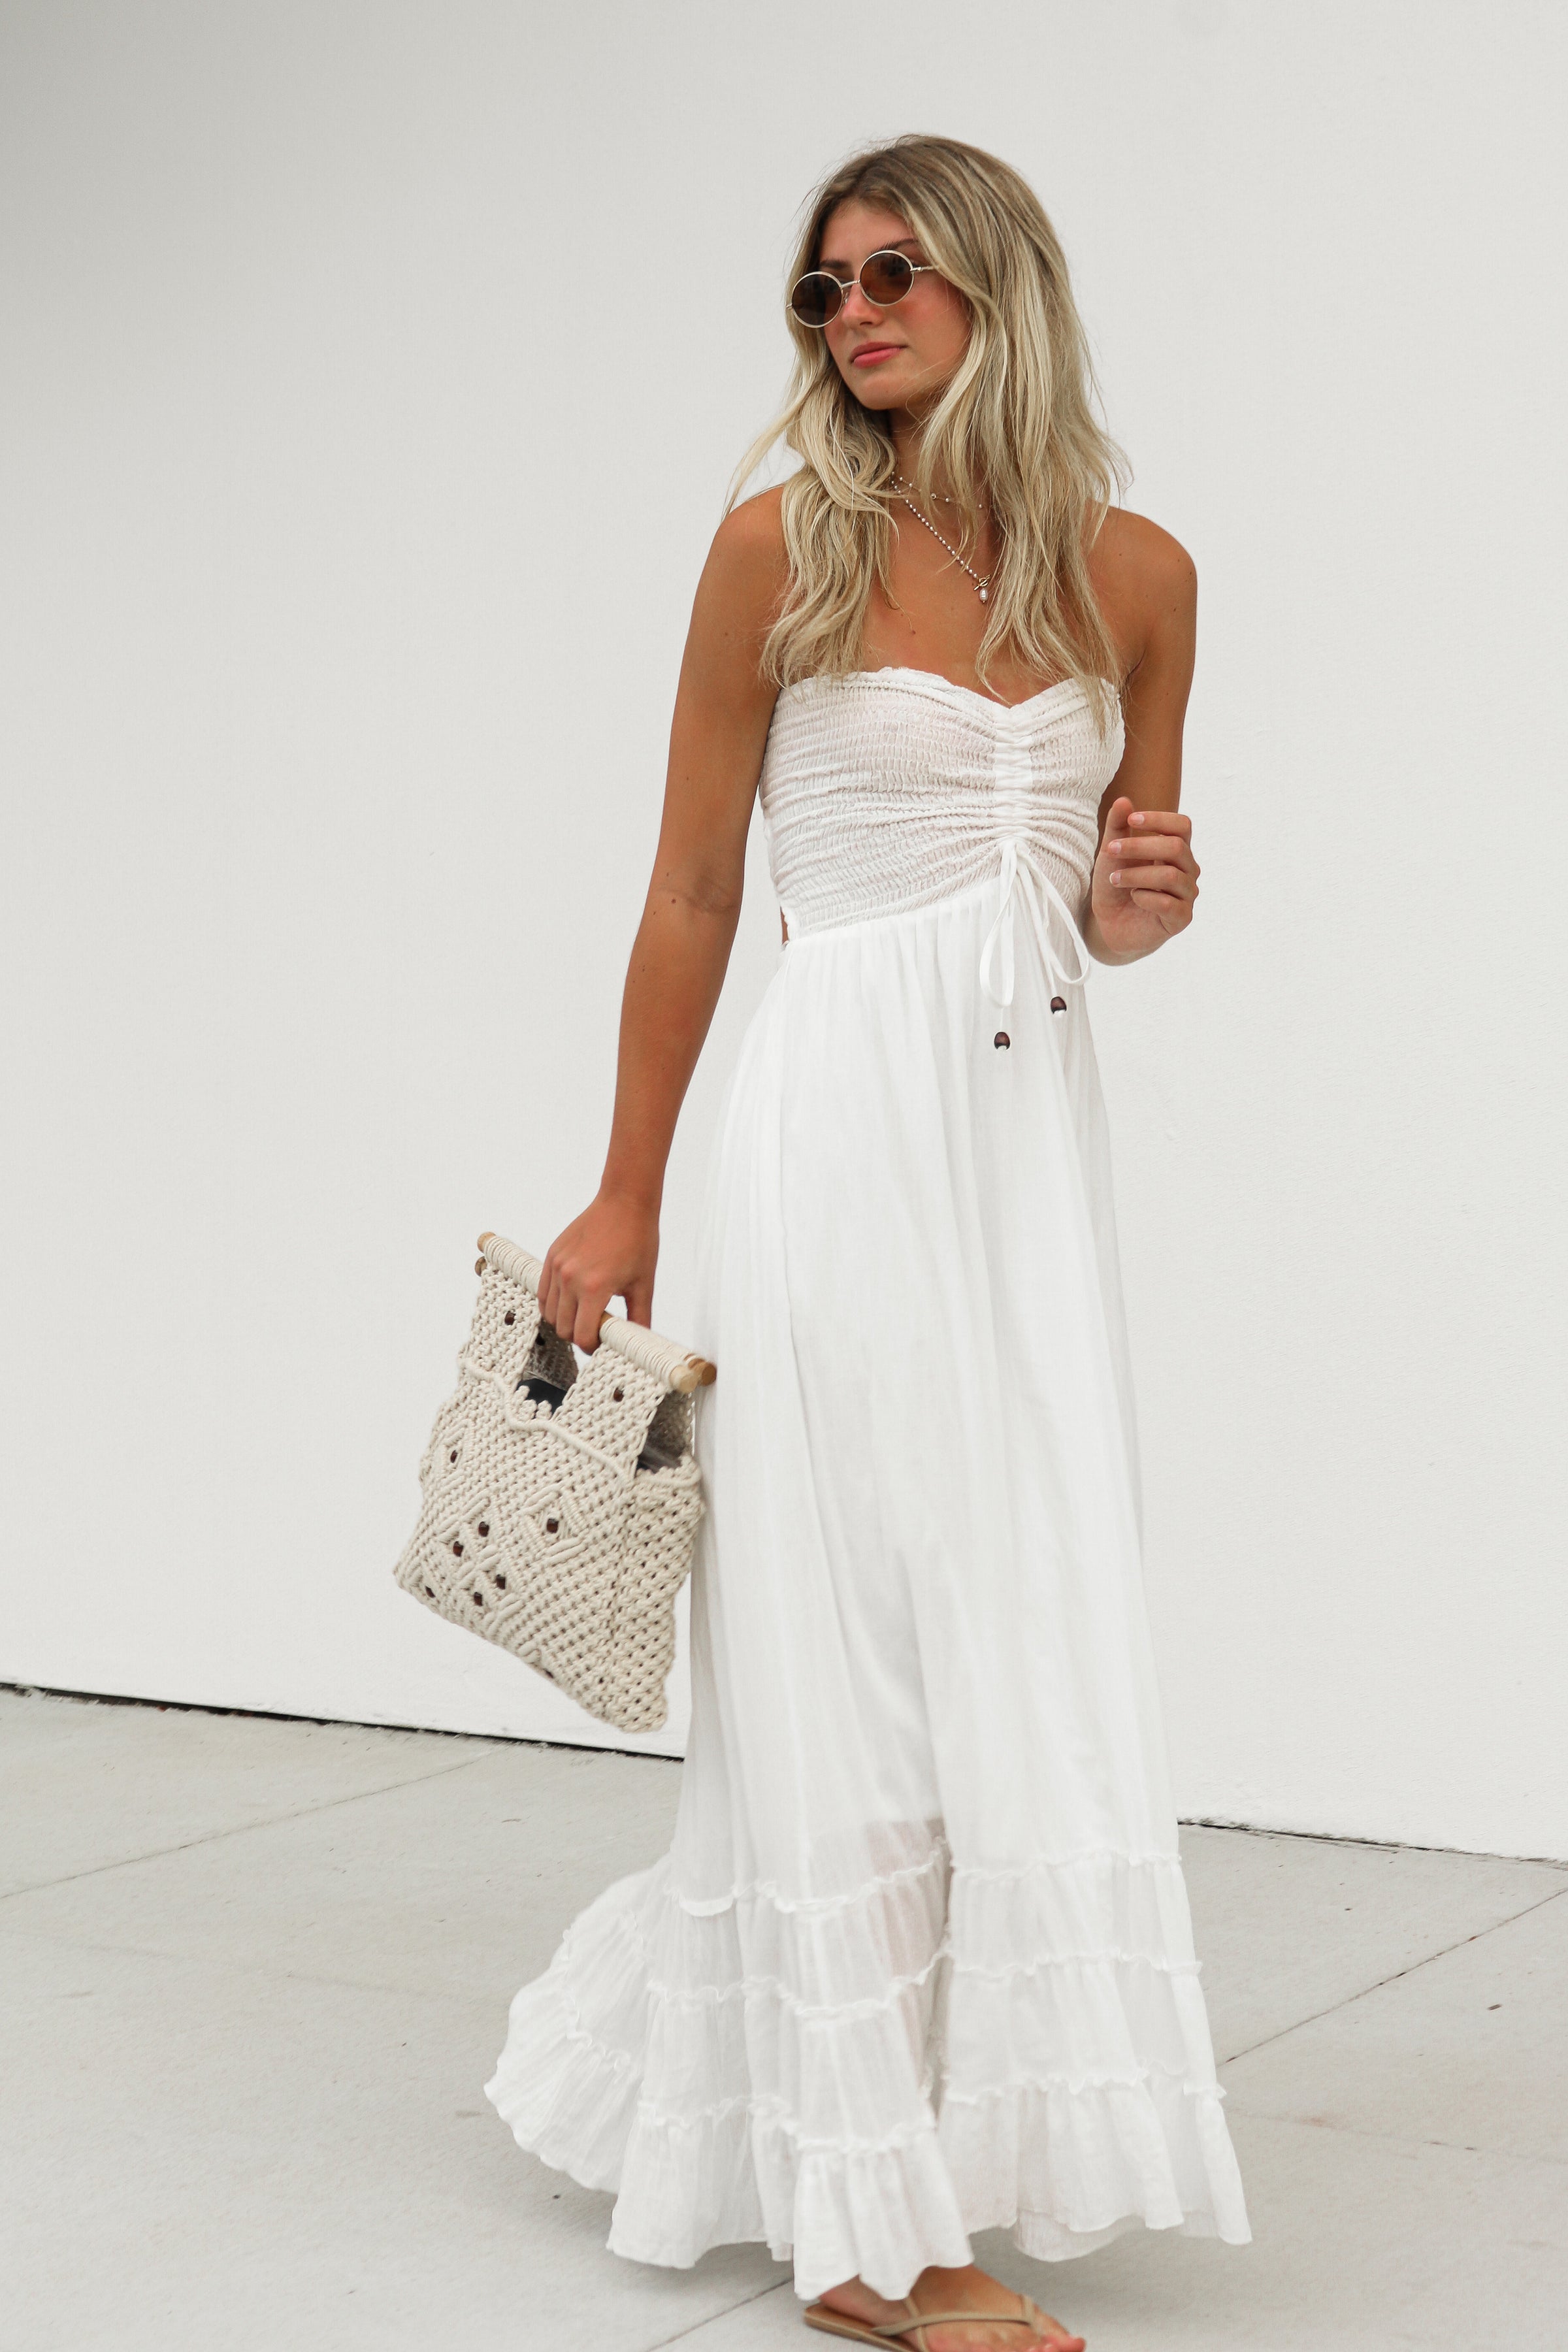 Maxi Dress with a Bralette - By Lauren M